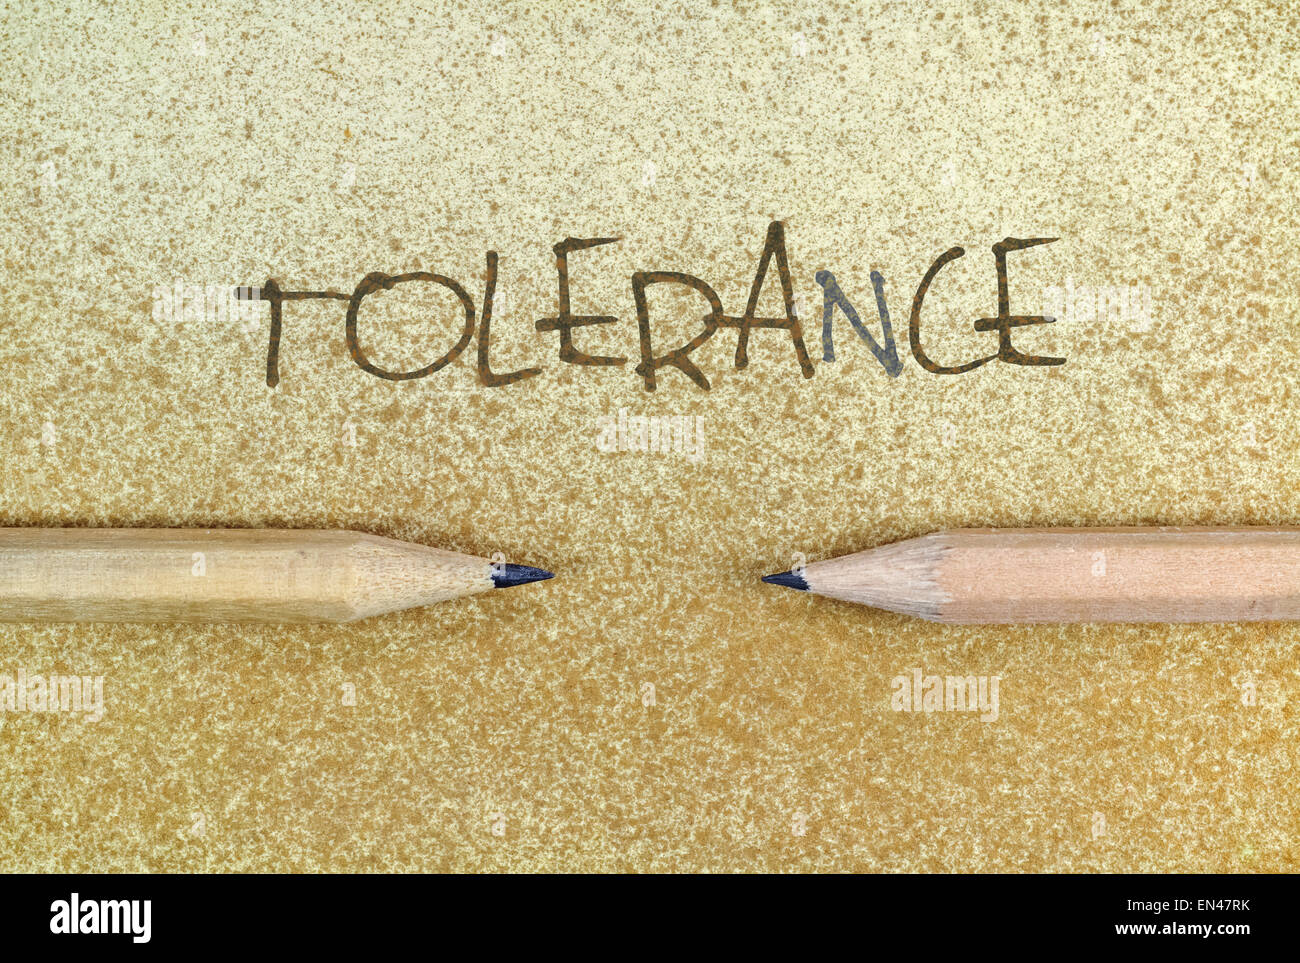 Pencils in simple conceptual expression as an appeal for tolerance Stock Photo